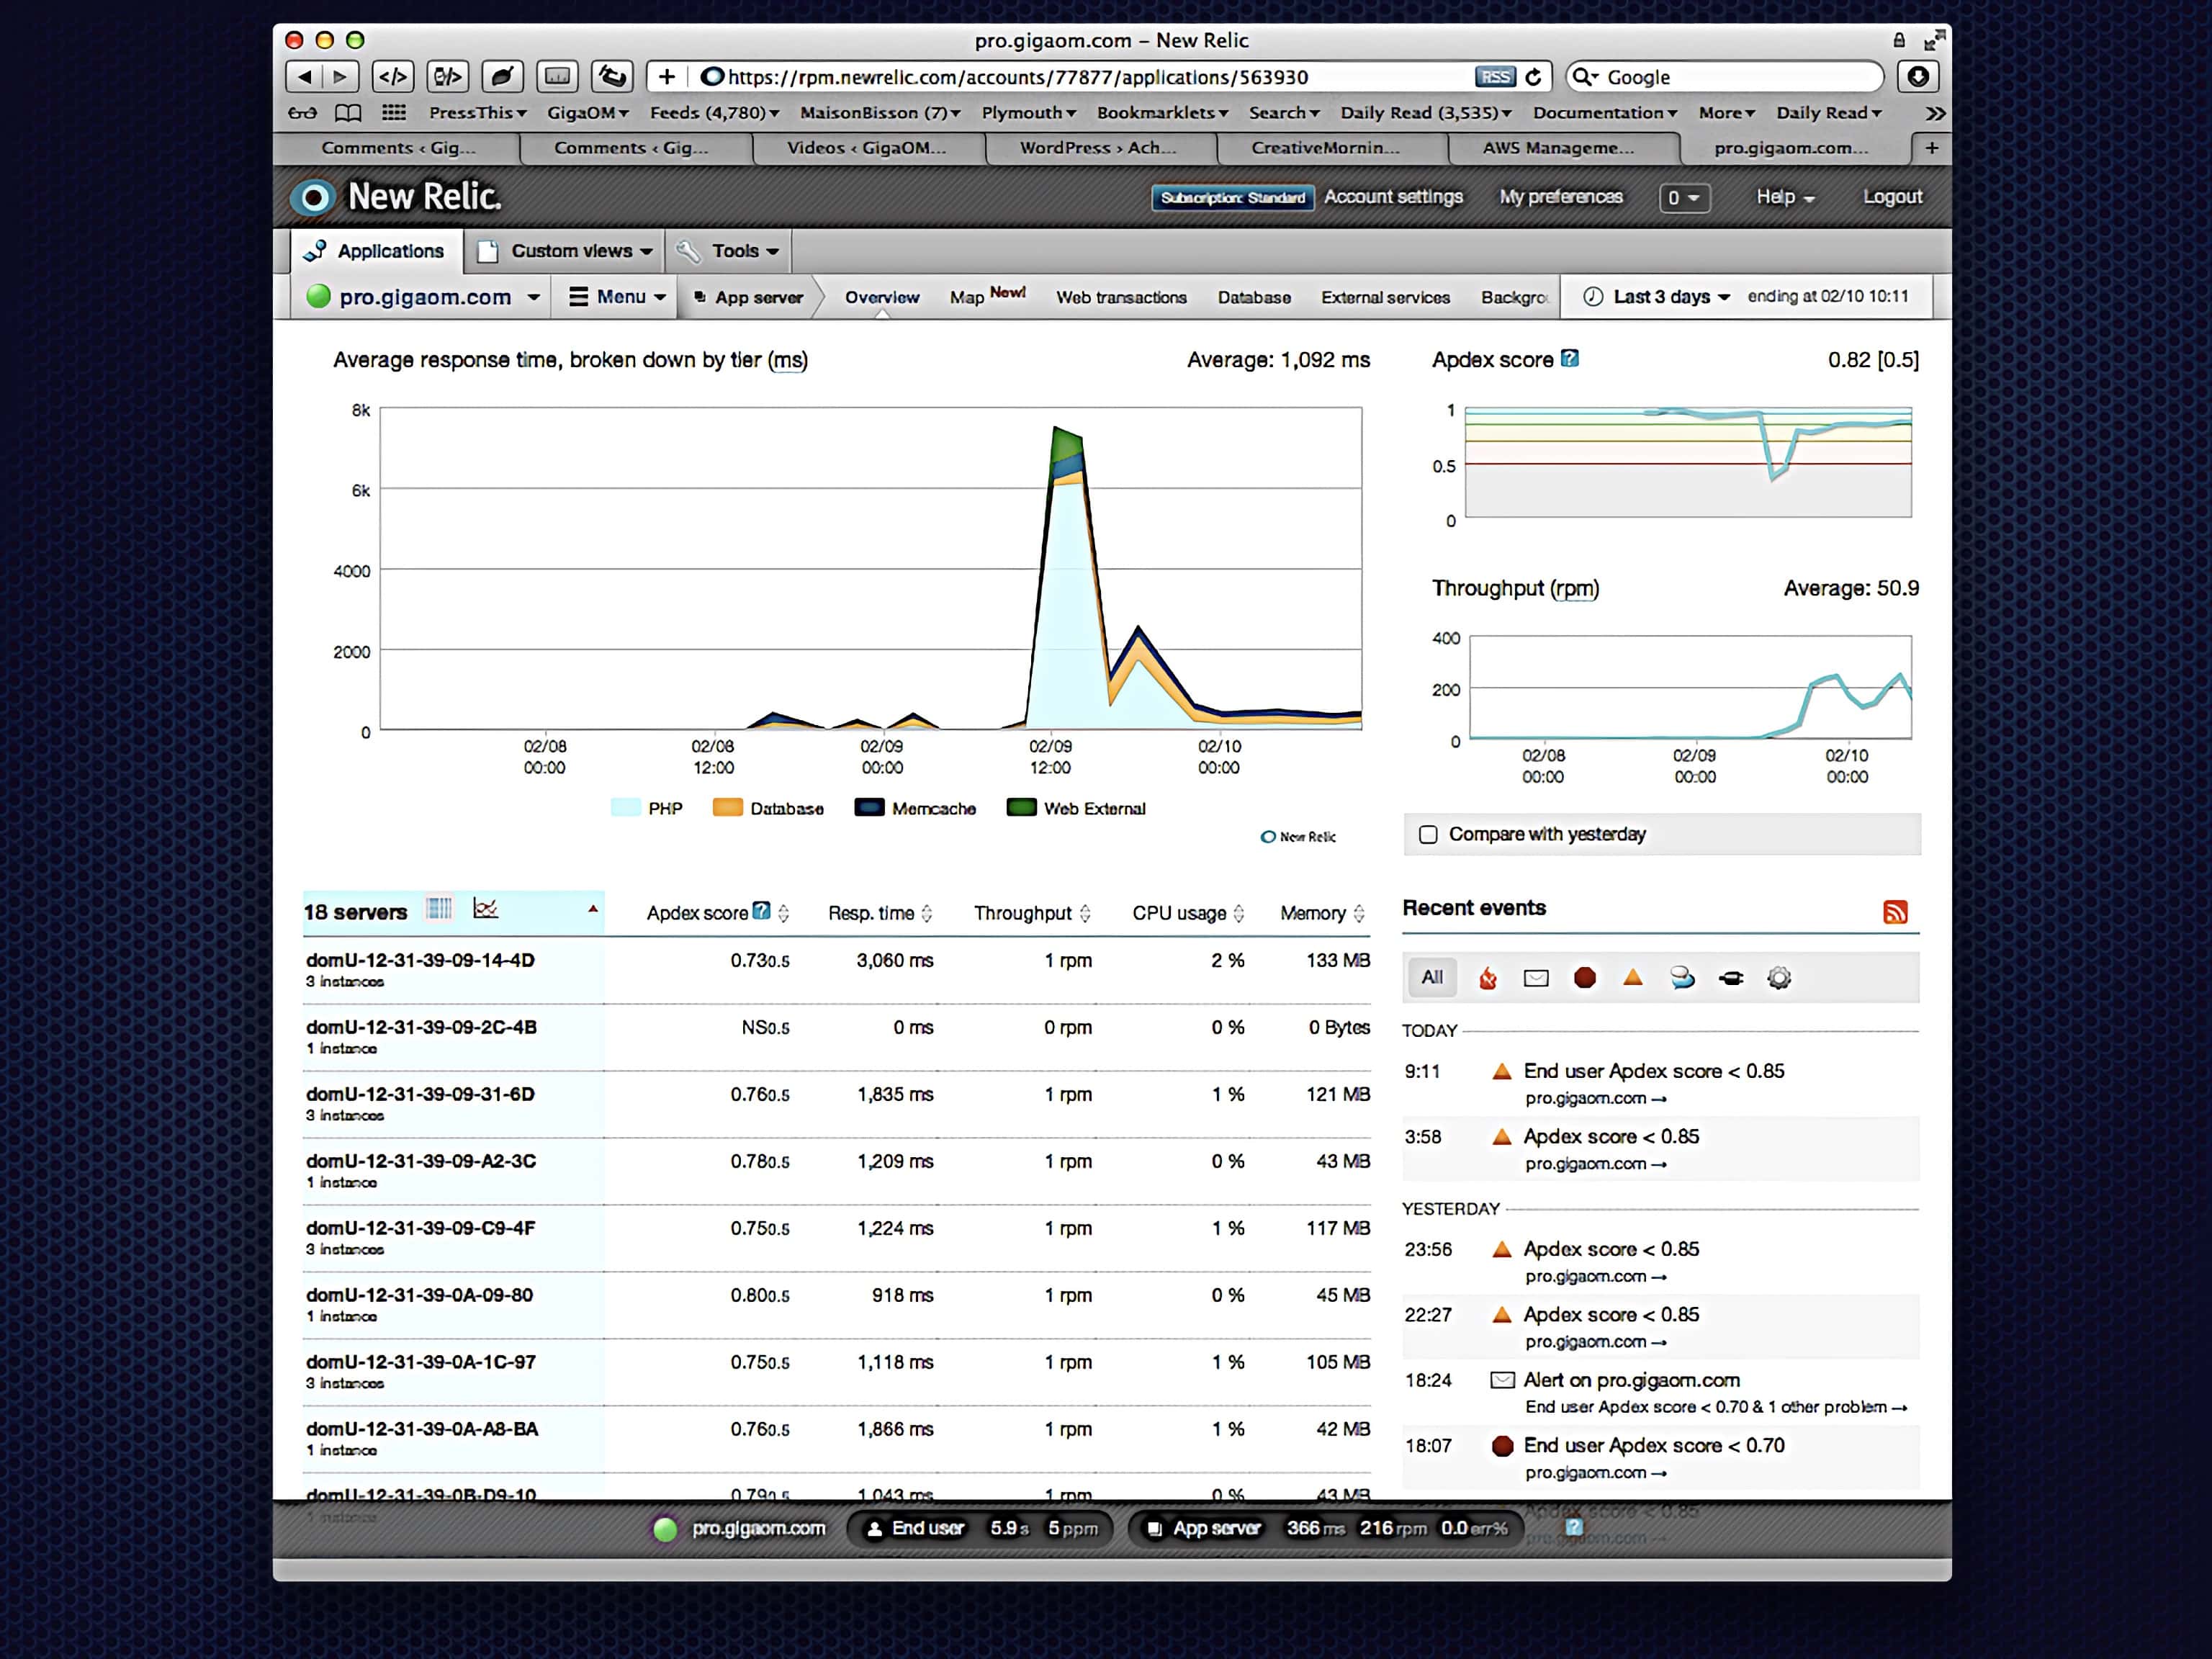 New Relic gives me the visibility I need into how those processors are running.